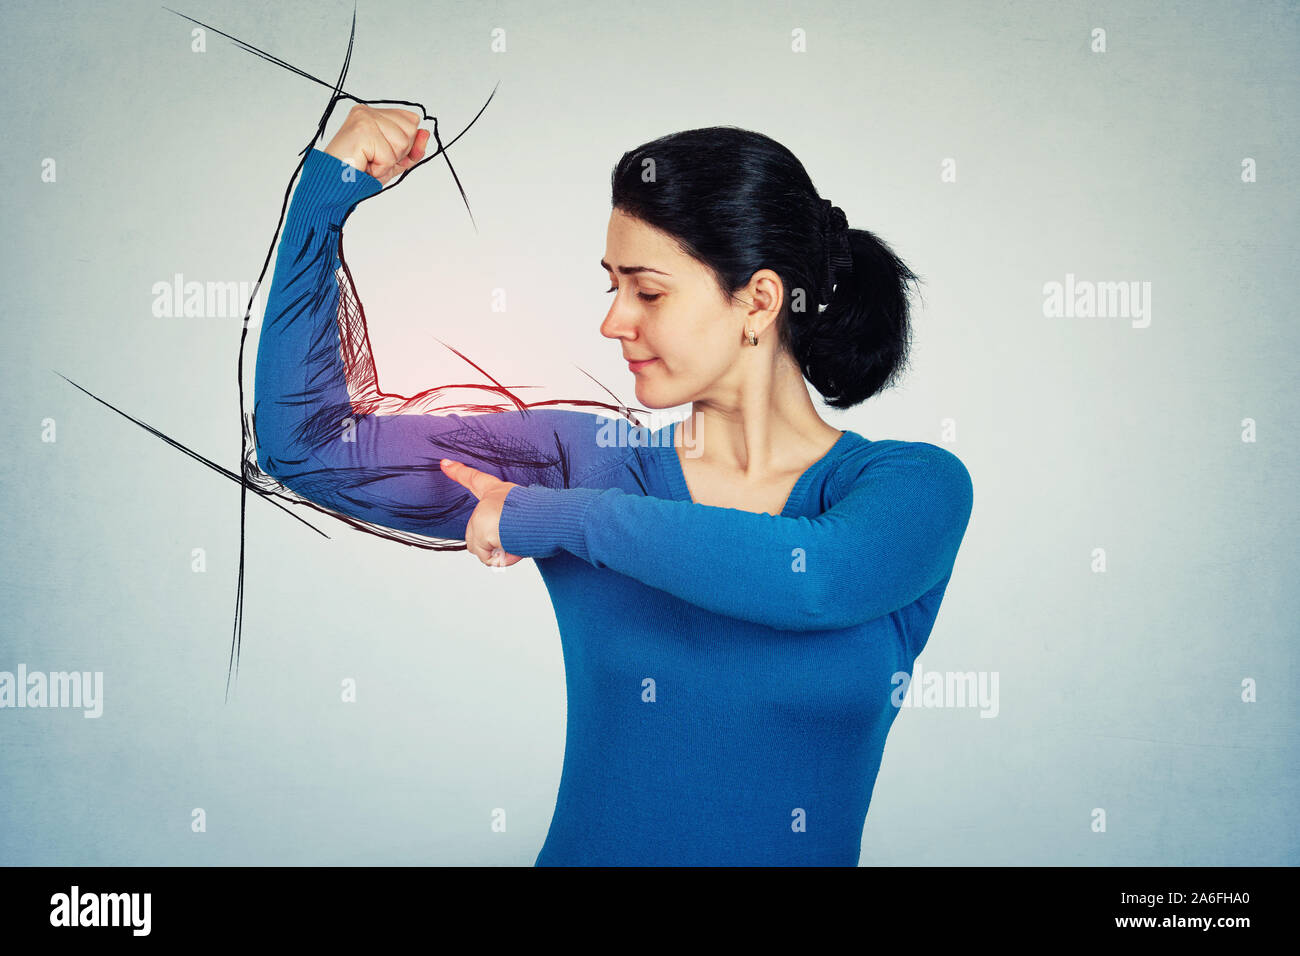 https://c8.alamy.com/comp/2A6FHA0/confident-and-determined-woman-flexing-muscles-imagine-has-a-powerful-arm-with-big-biceps-girl-showing-her-strength-positive-face-expression-person-2A6FHA0.jpg